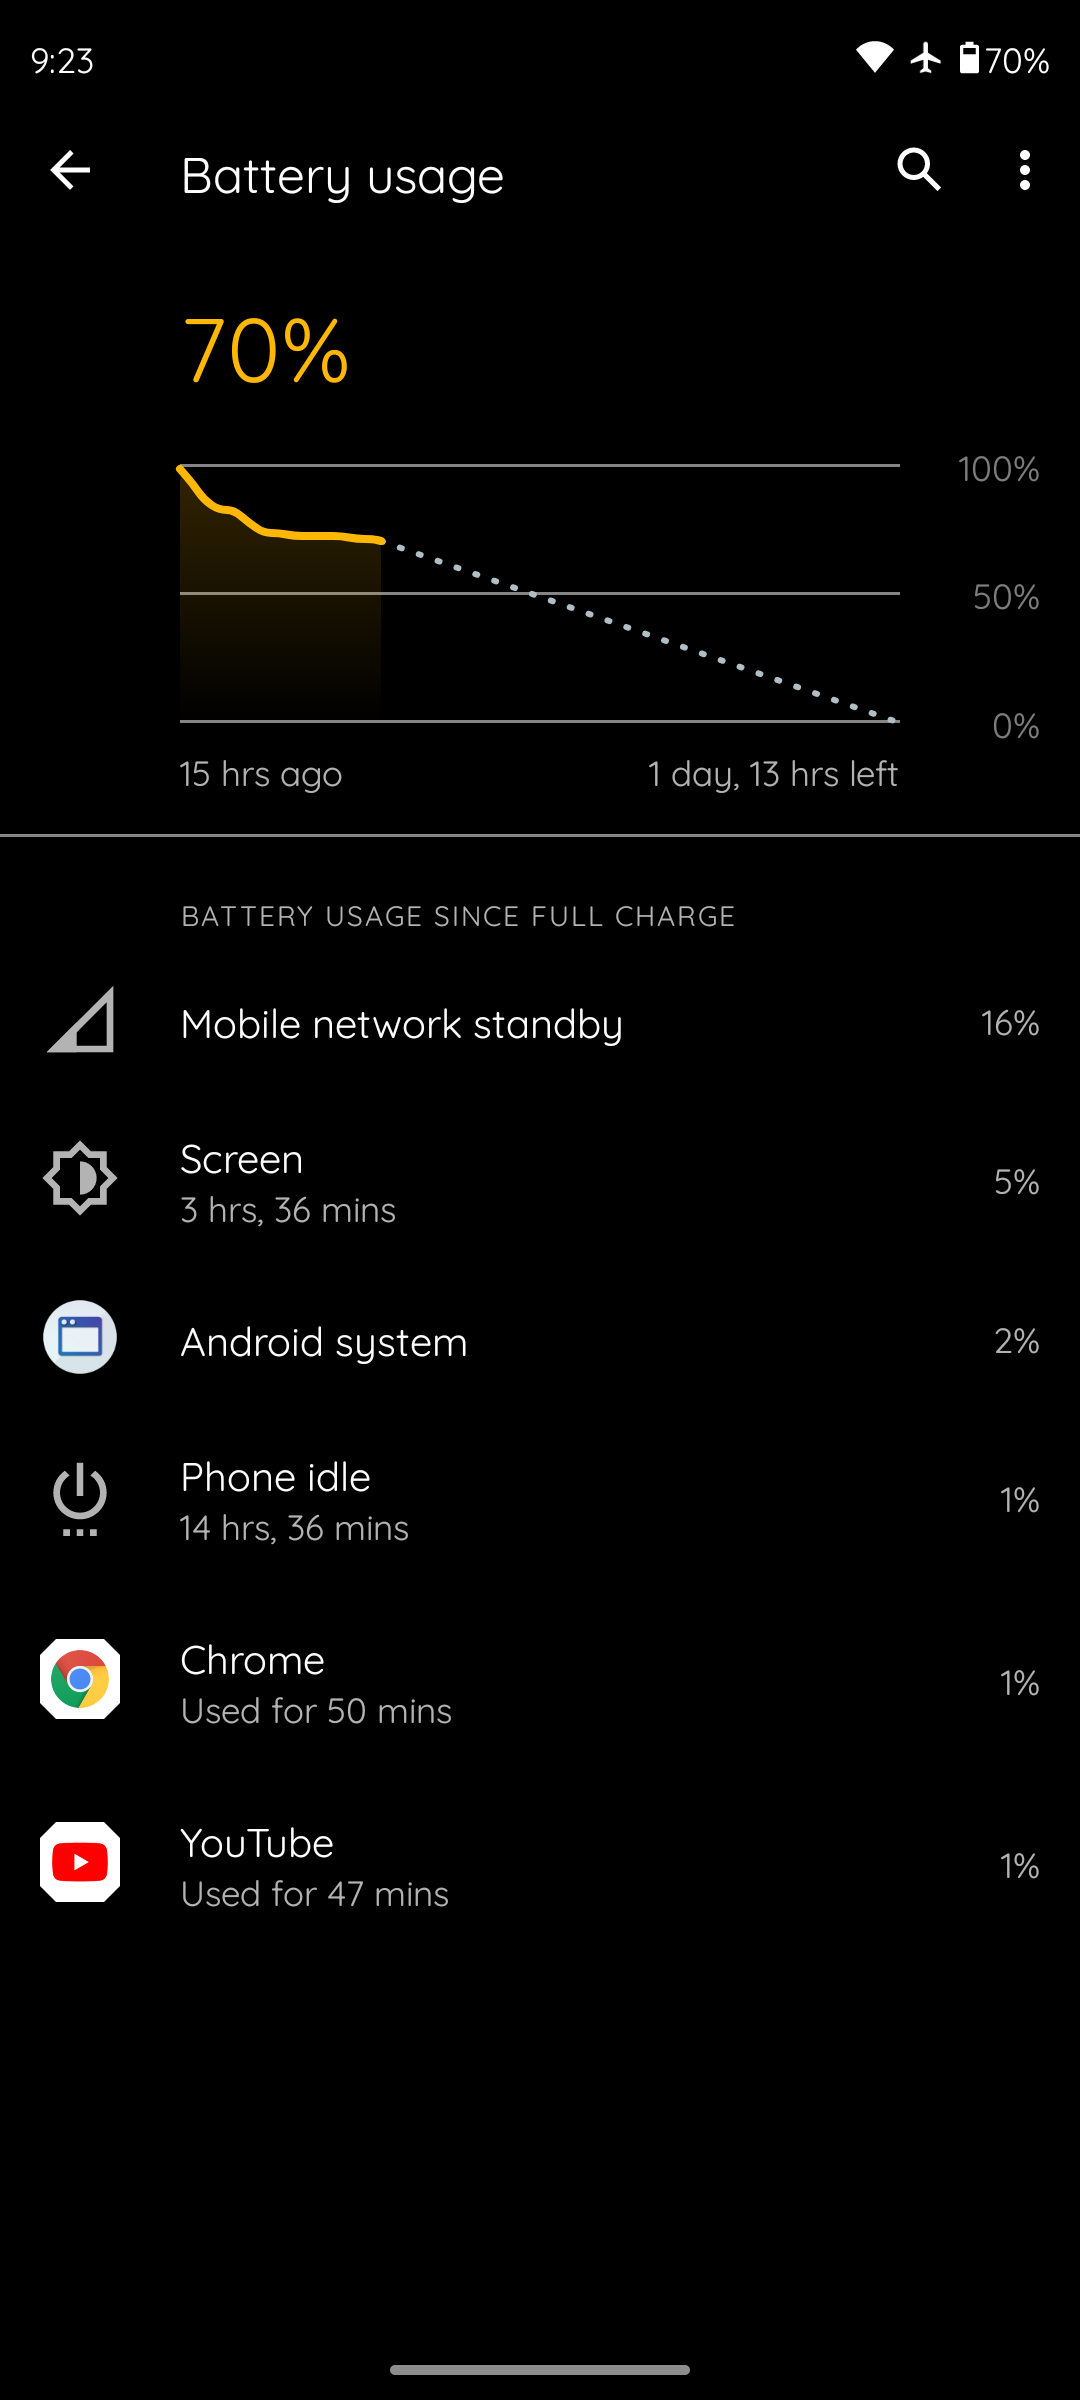 Massive-battery-drain-from-mobile-network-standby-even-on-airplane-mode -  English Motorola - MOTO COMMUNITY